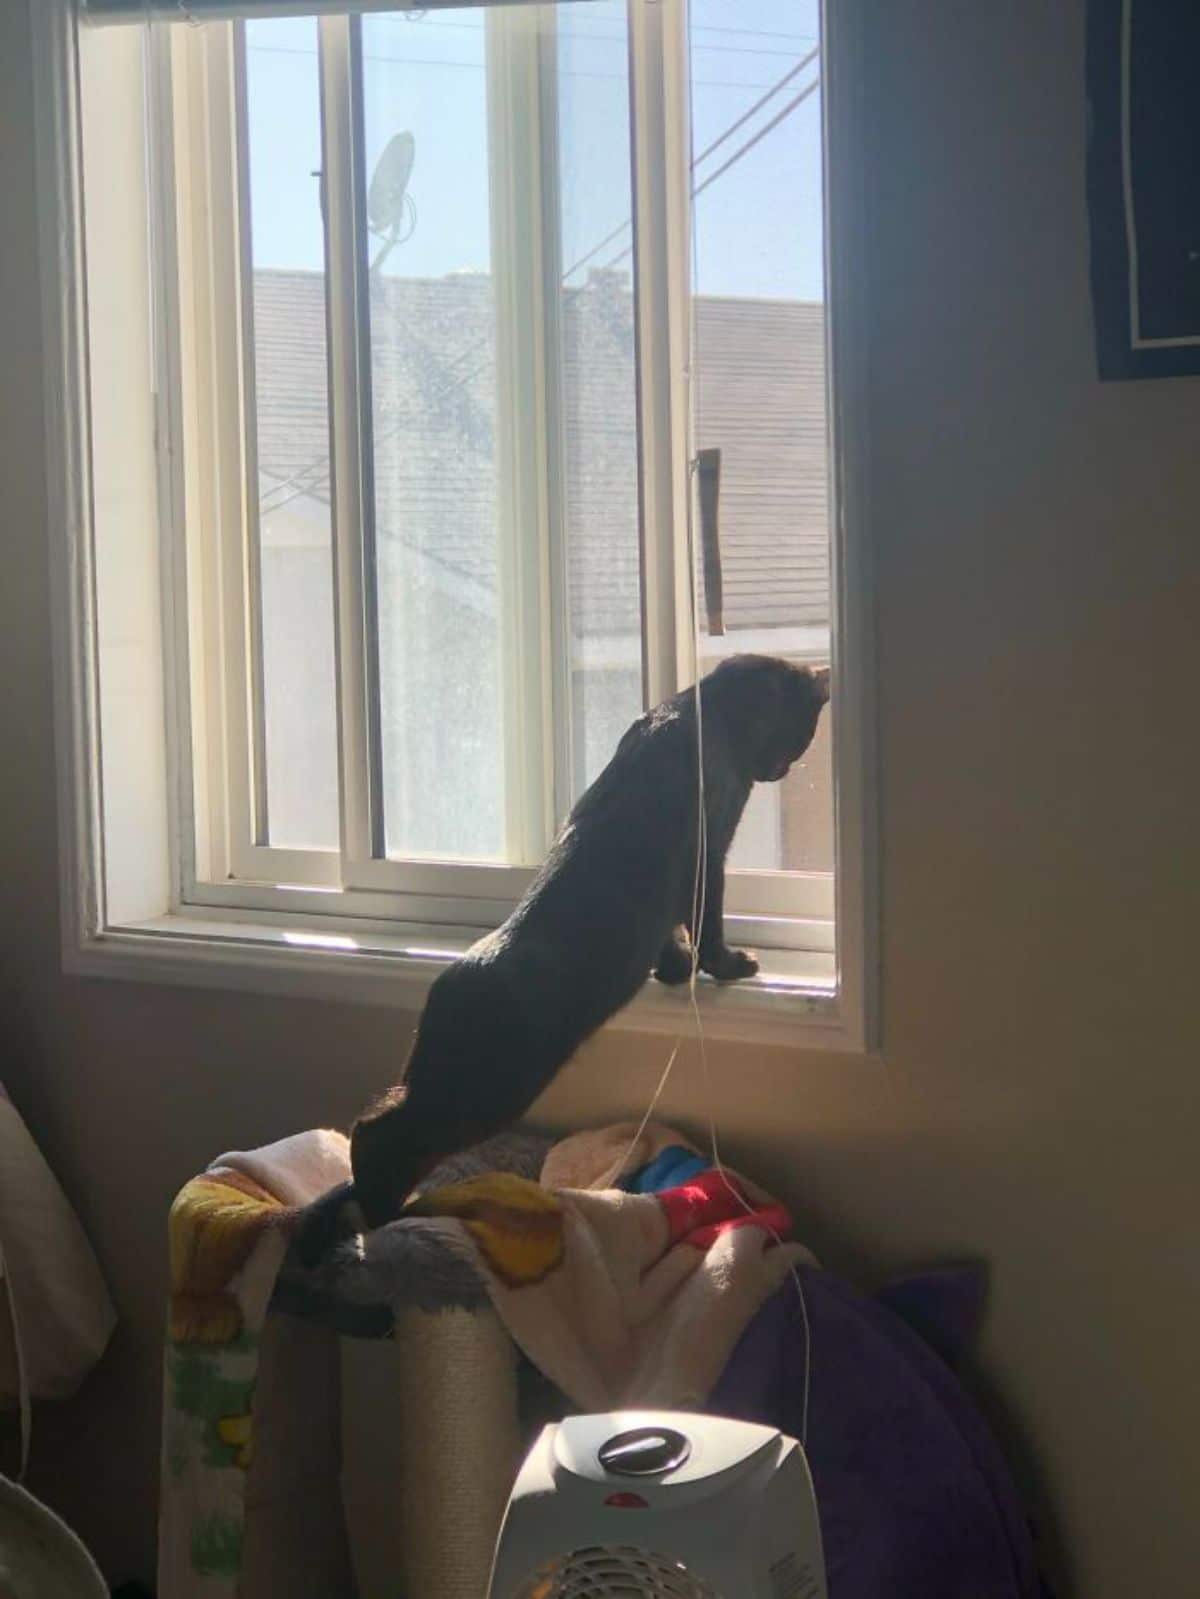 black cat standing on hind legs with front paws on a ledge looking out the window